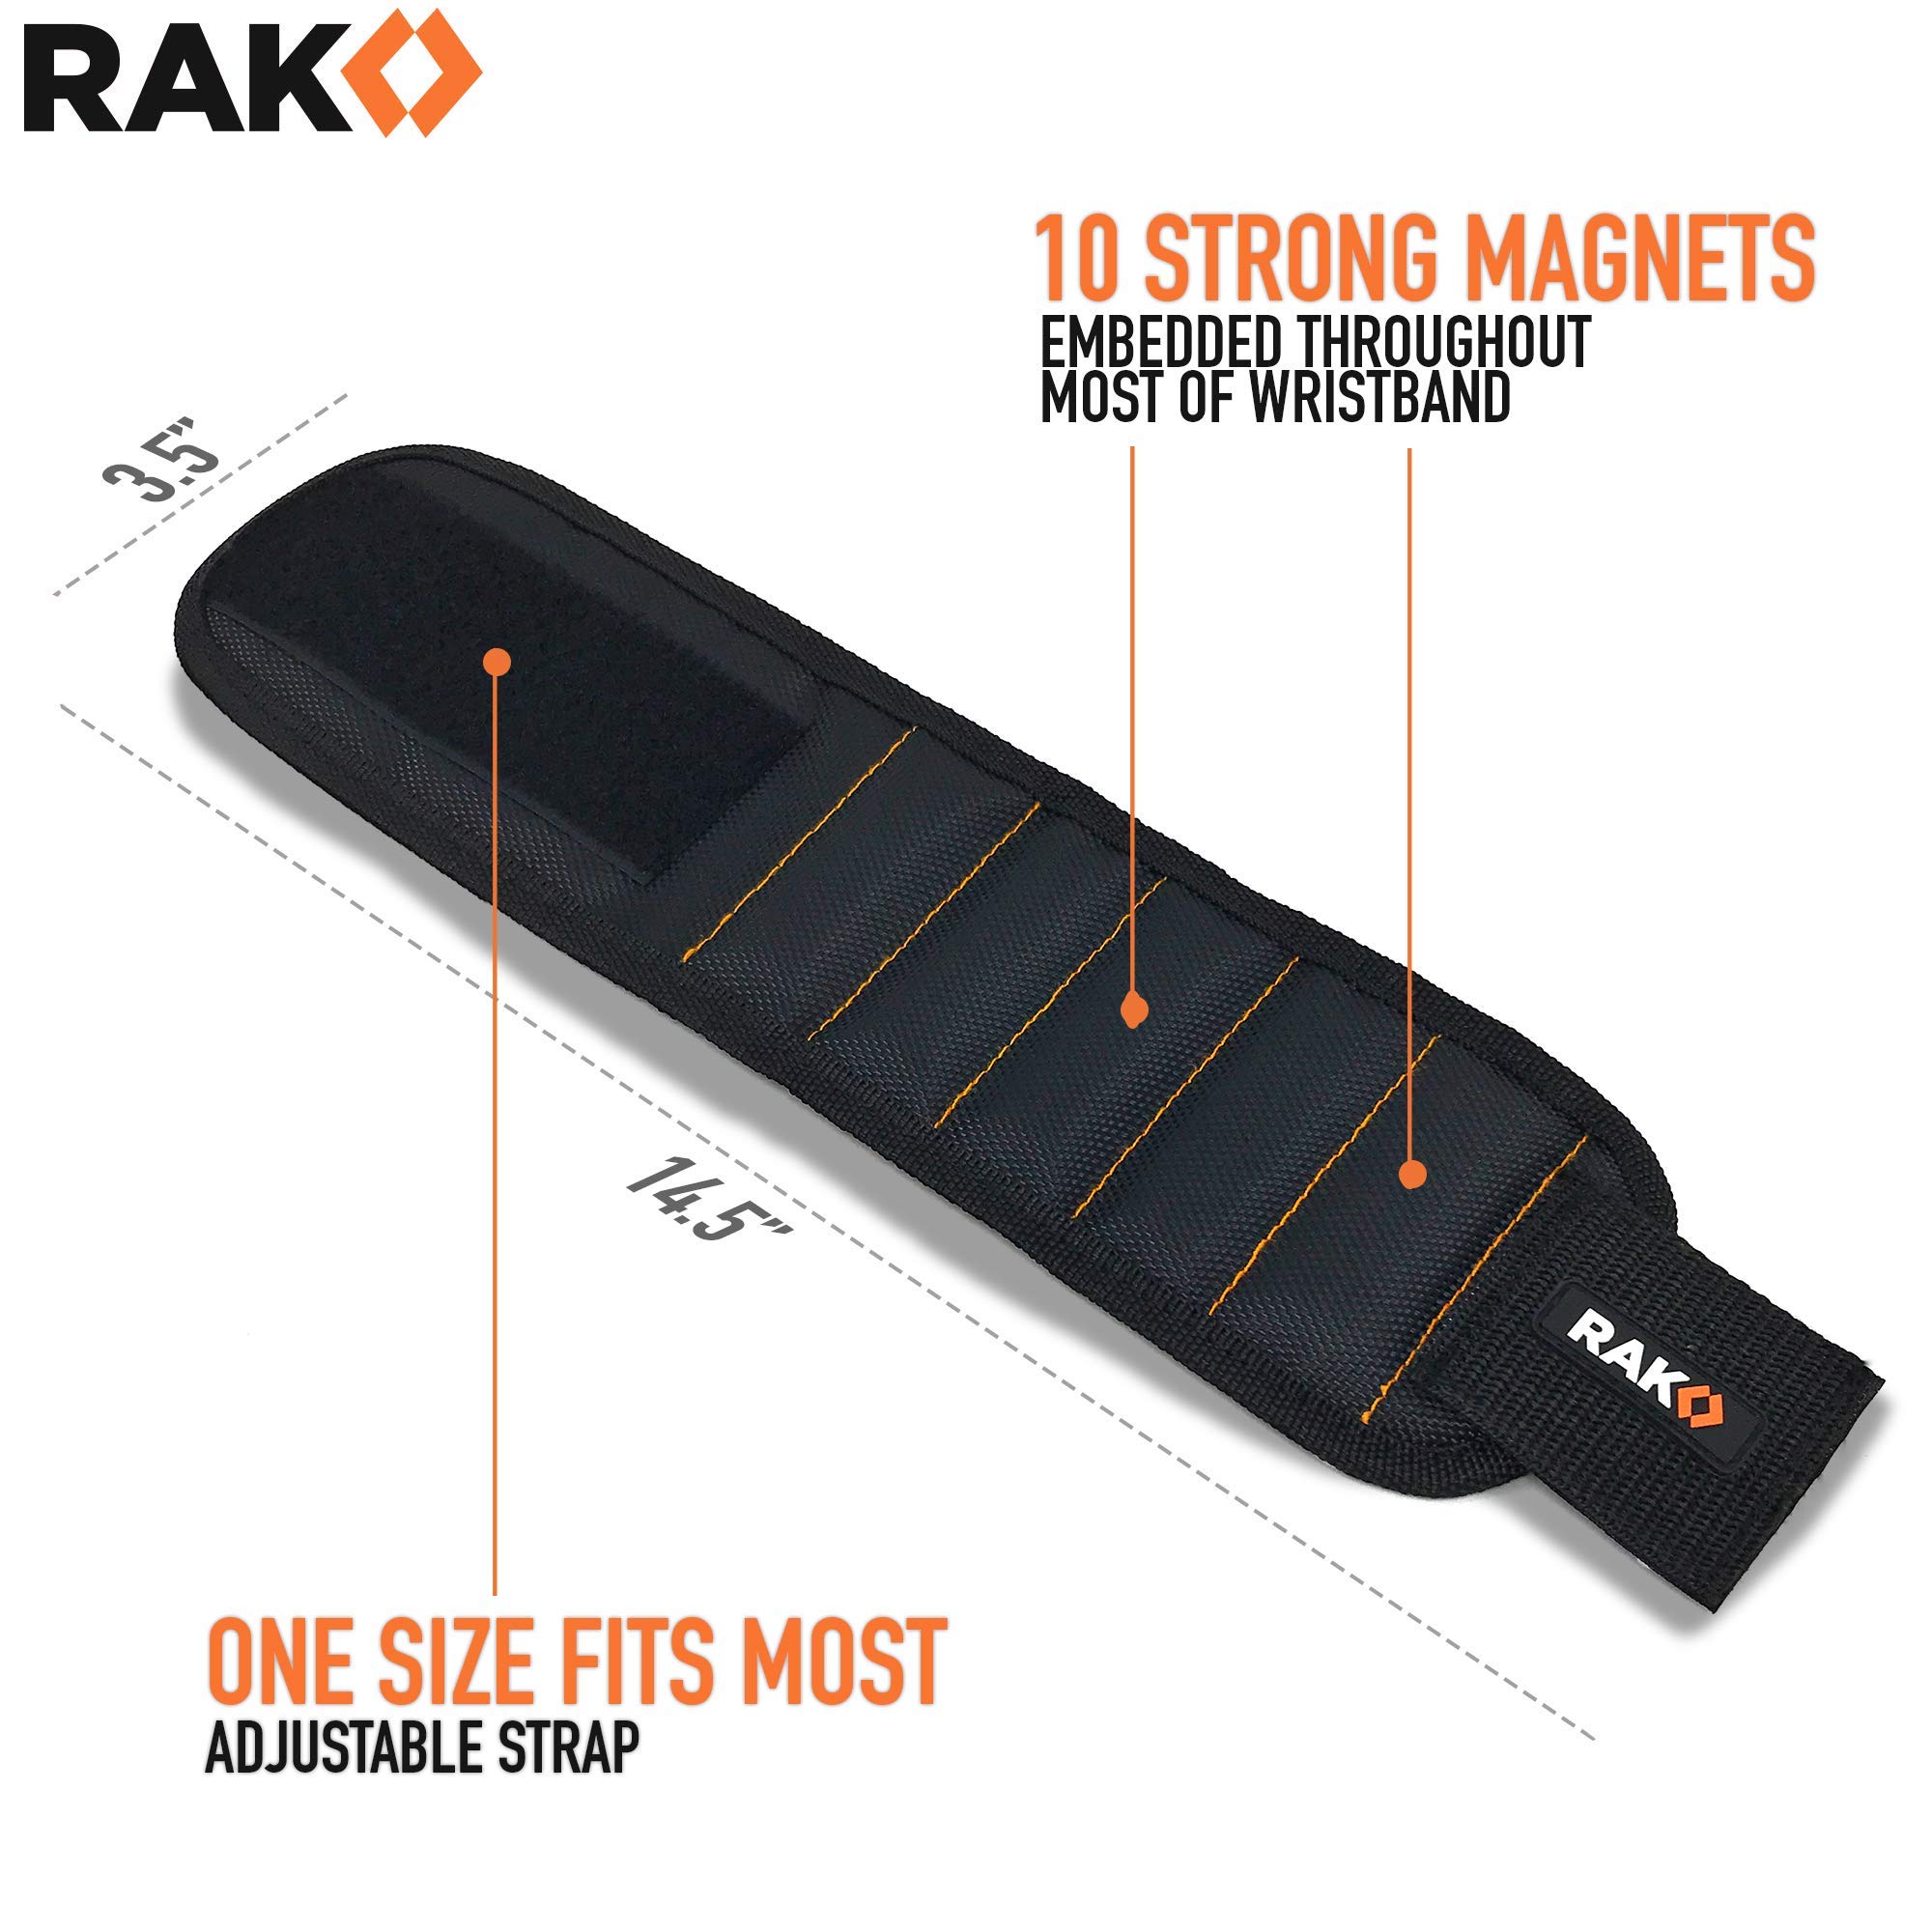 RAK Magnetic Wristband for Holding Screws, Nails and Drill Bits - Birthday Gifts for Men - Made from Premium Ballistic Nylon with Lightweight Powerful Magnets - Cool Gadget Gifts for men